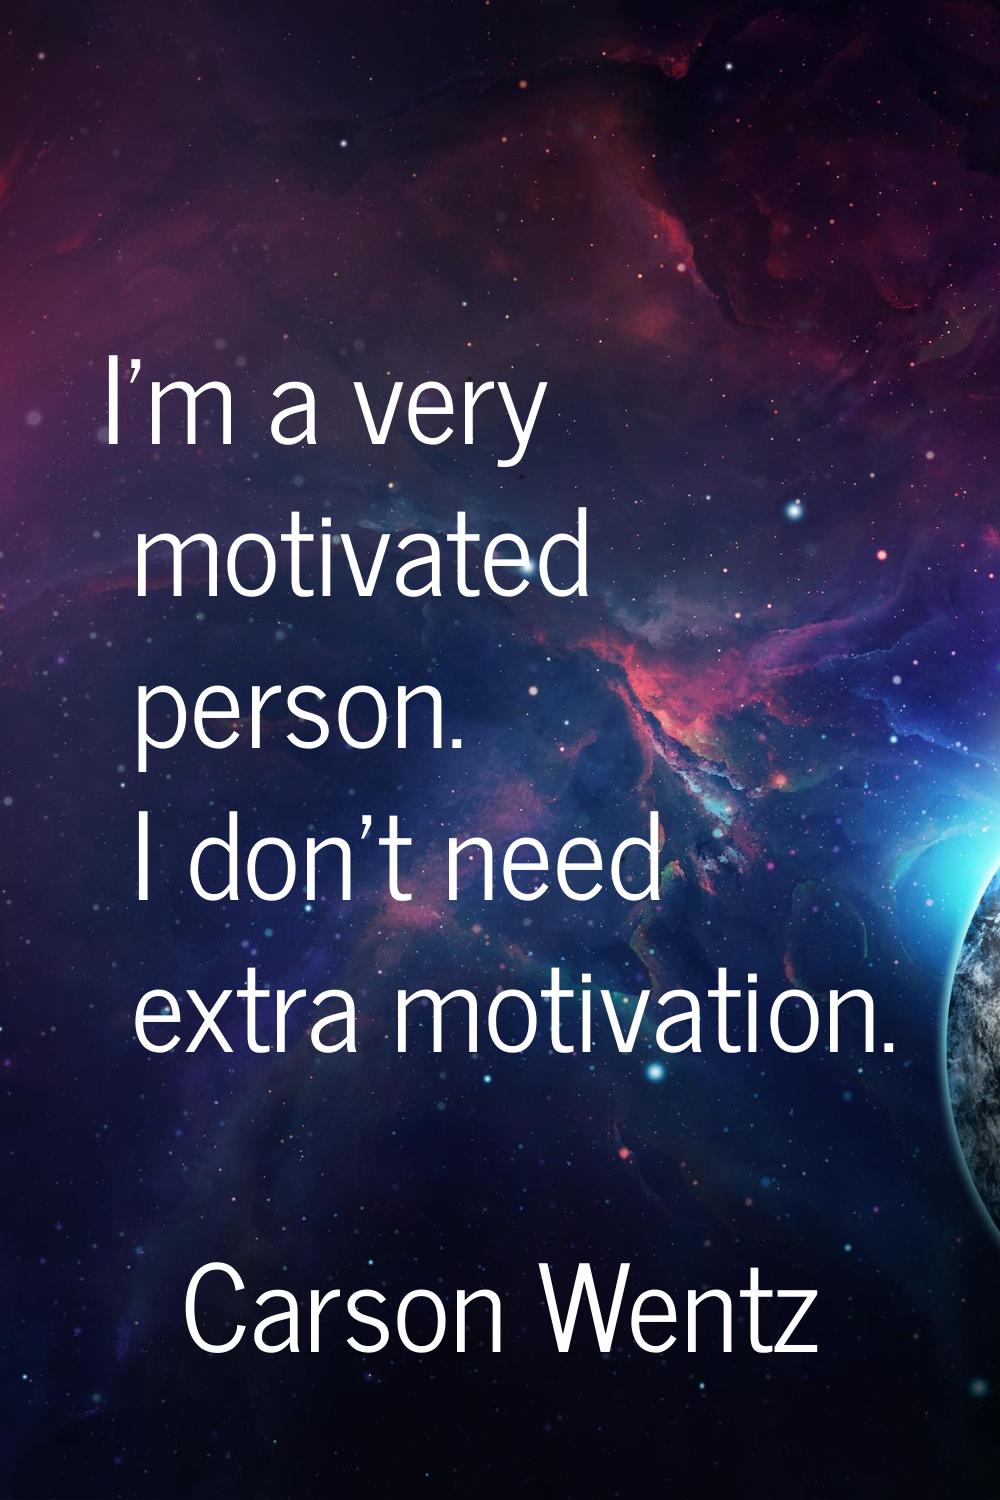 I'm a very motivated person. I don't need extra motivation.